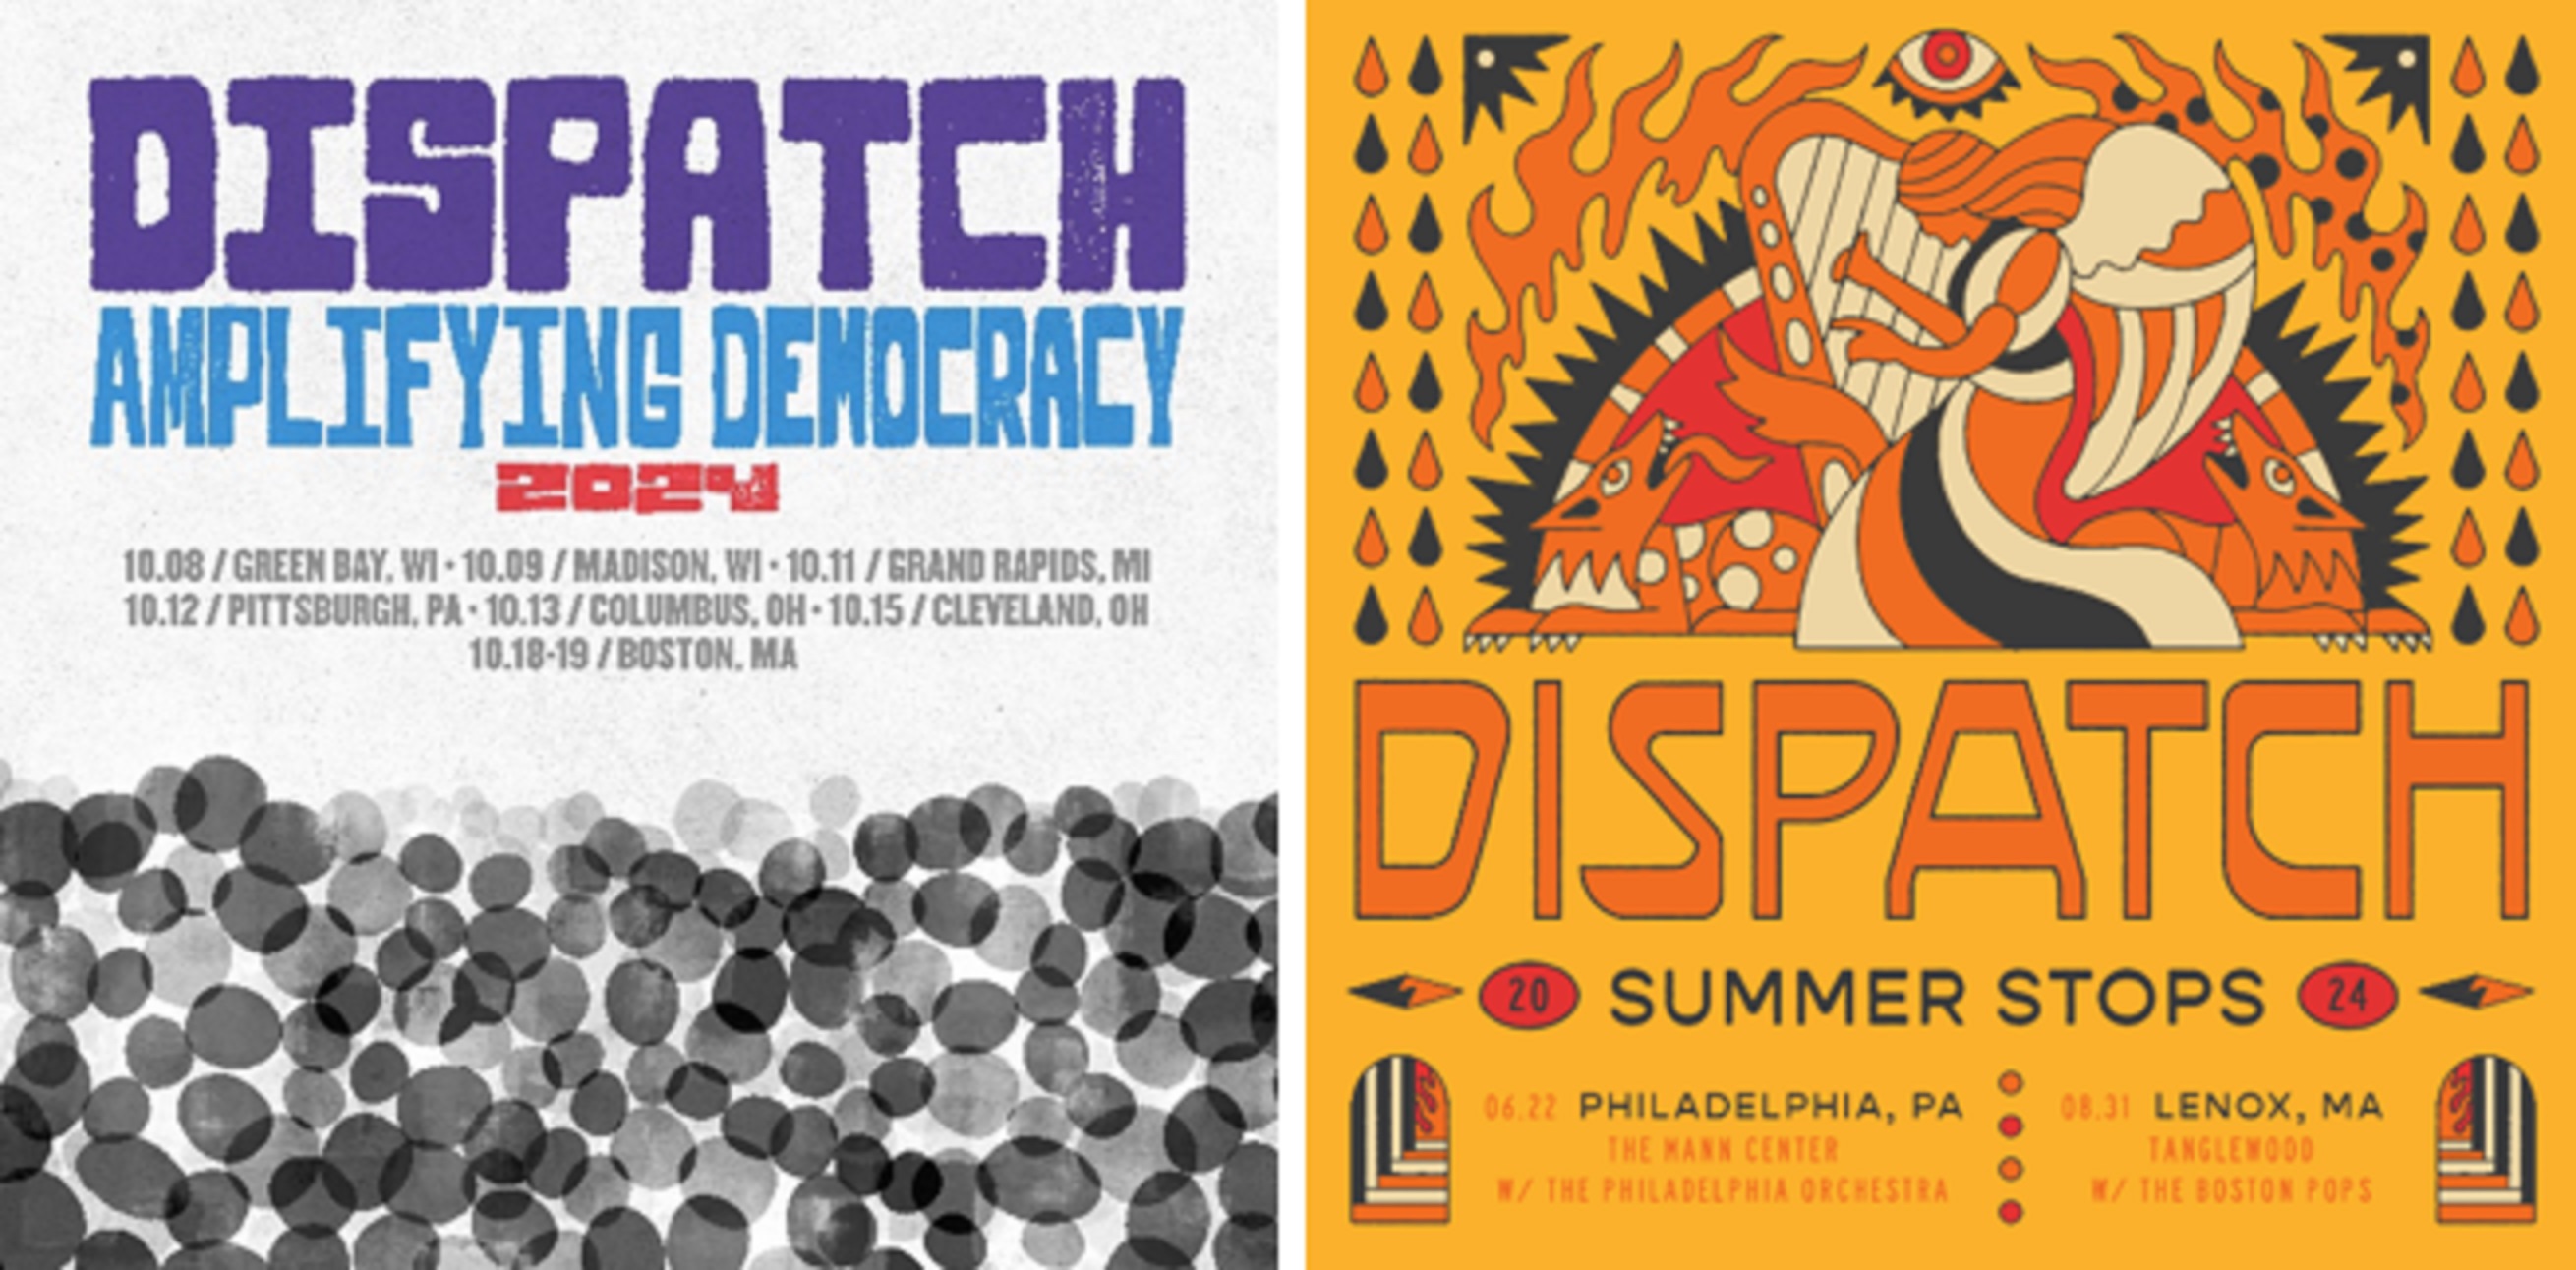 DISPATCH Announces AMPlifying Democracy Fall Tour in Partnership with Calling All Crows